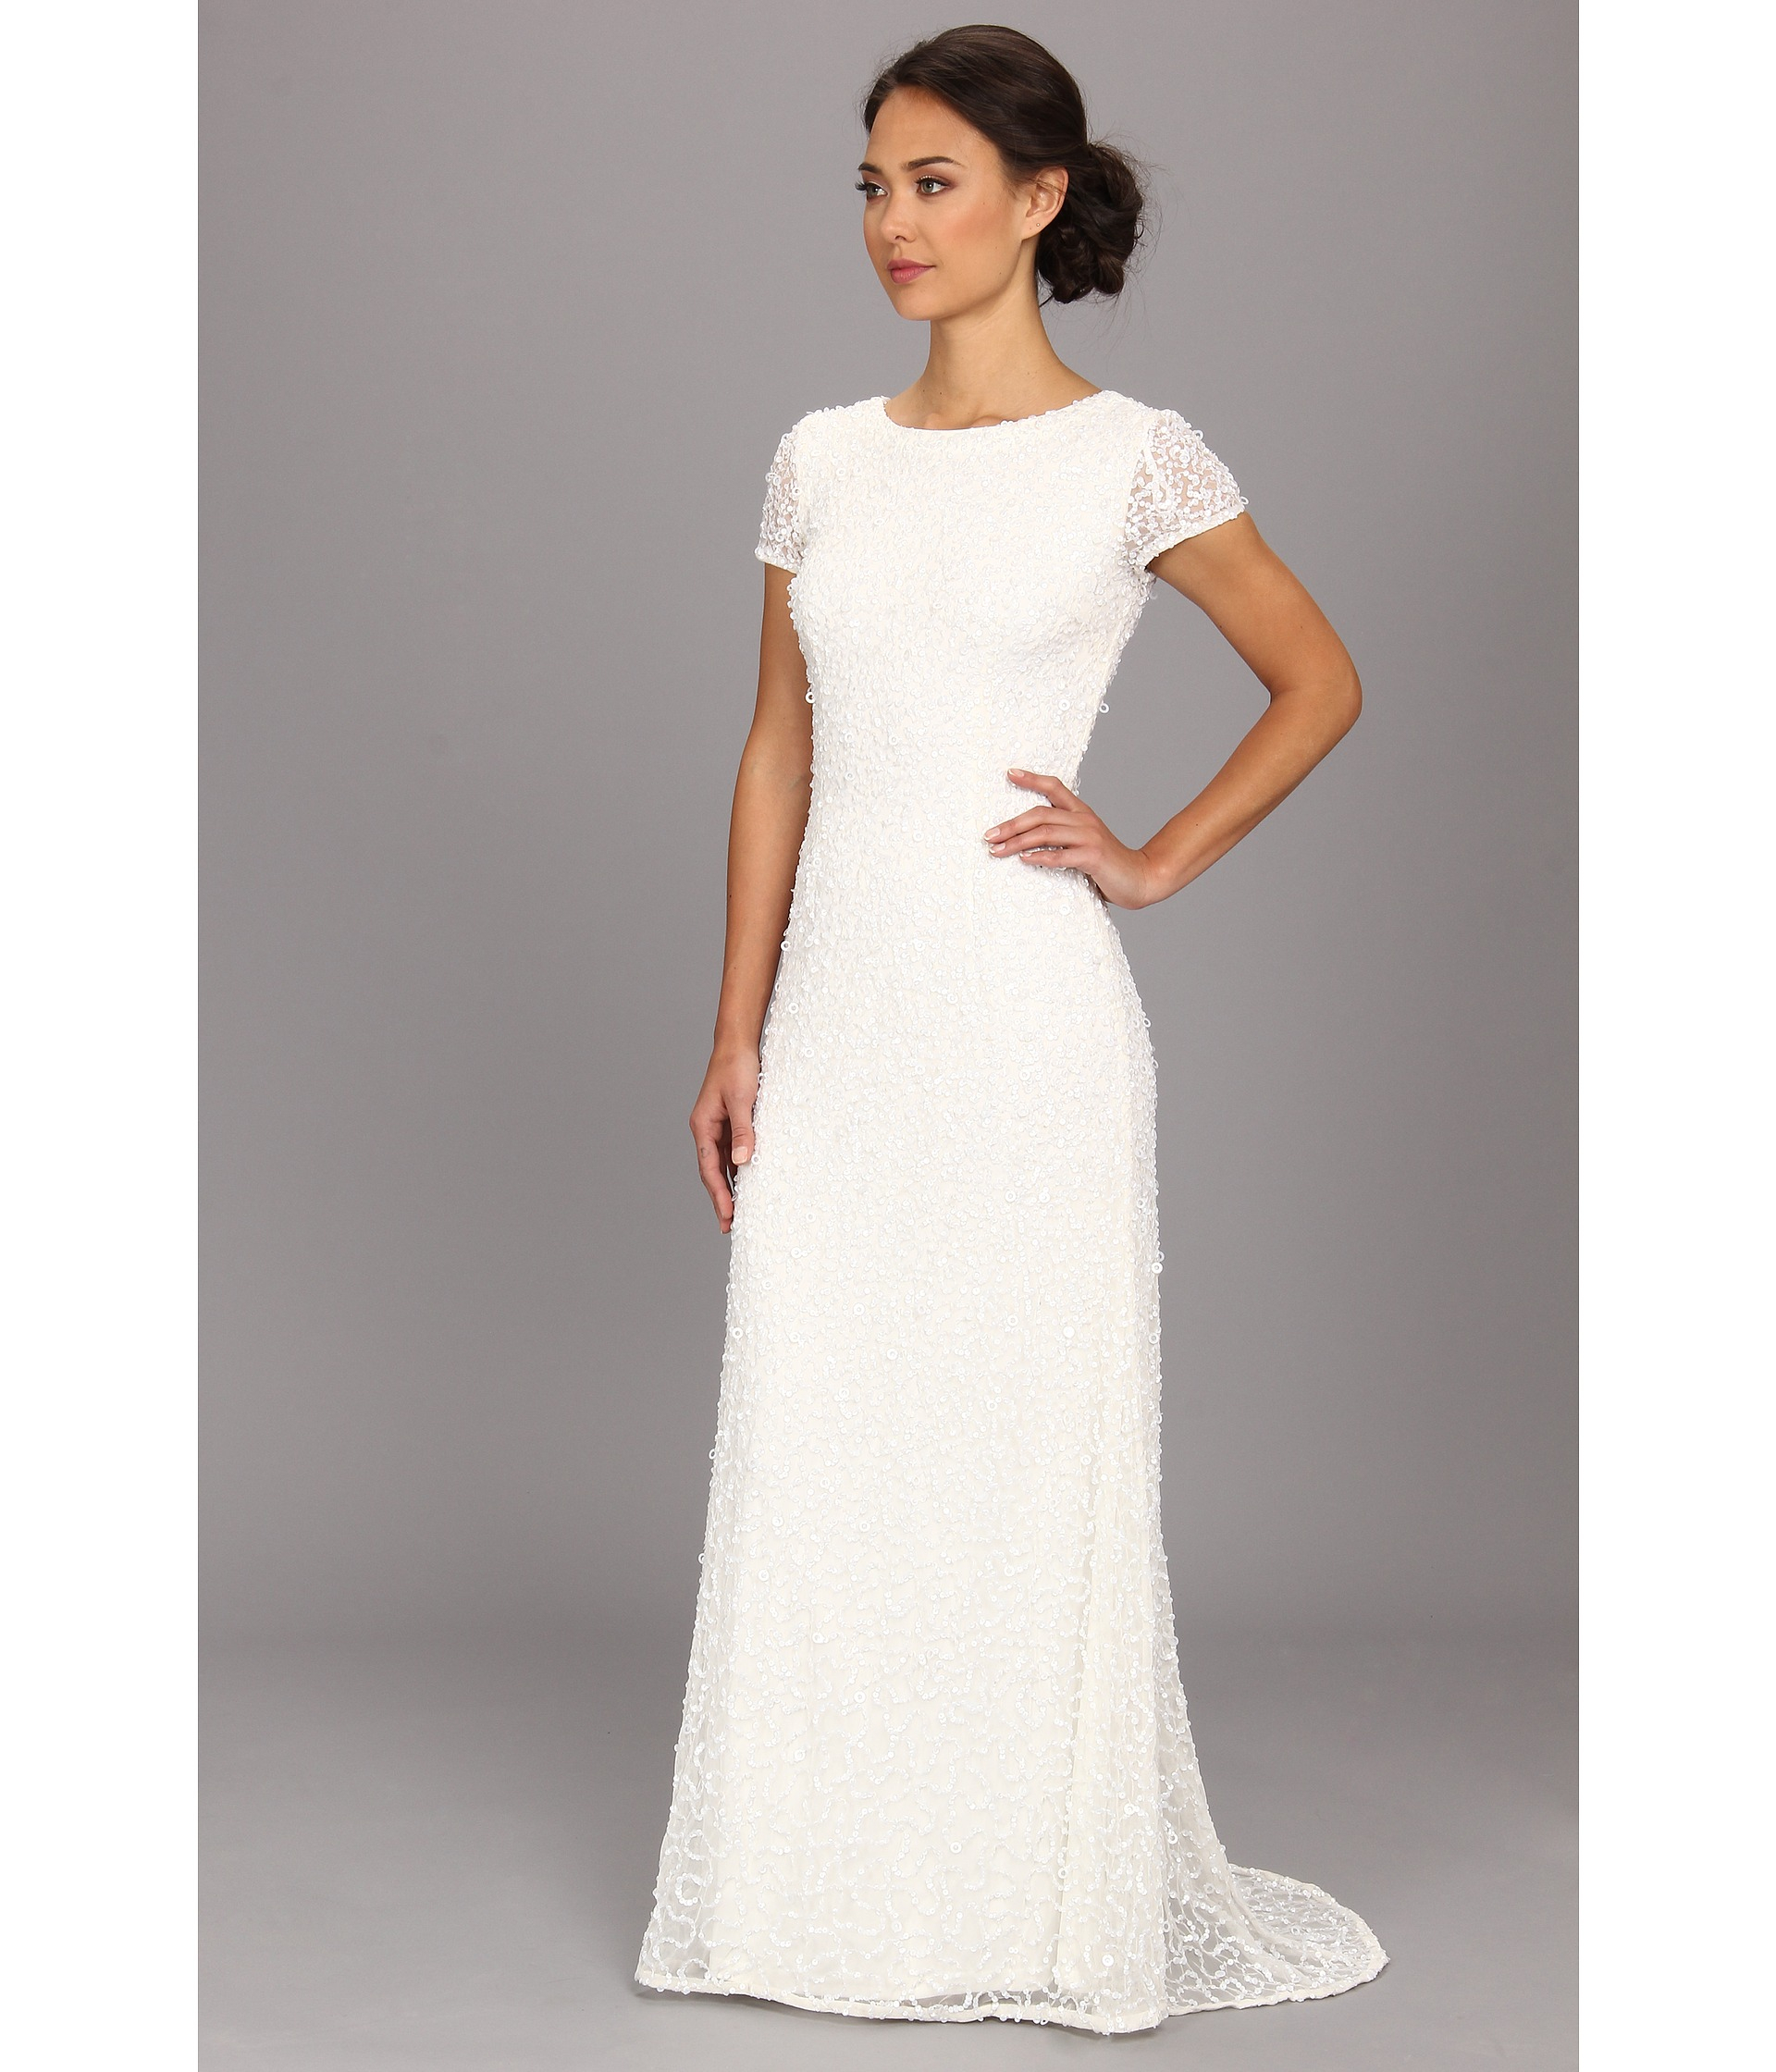 Lyst - Adrianna Papell Cap Sleeve Scoop Back Beaded Down Dress in White